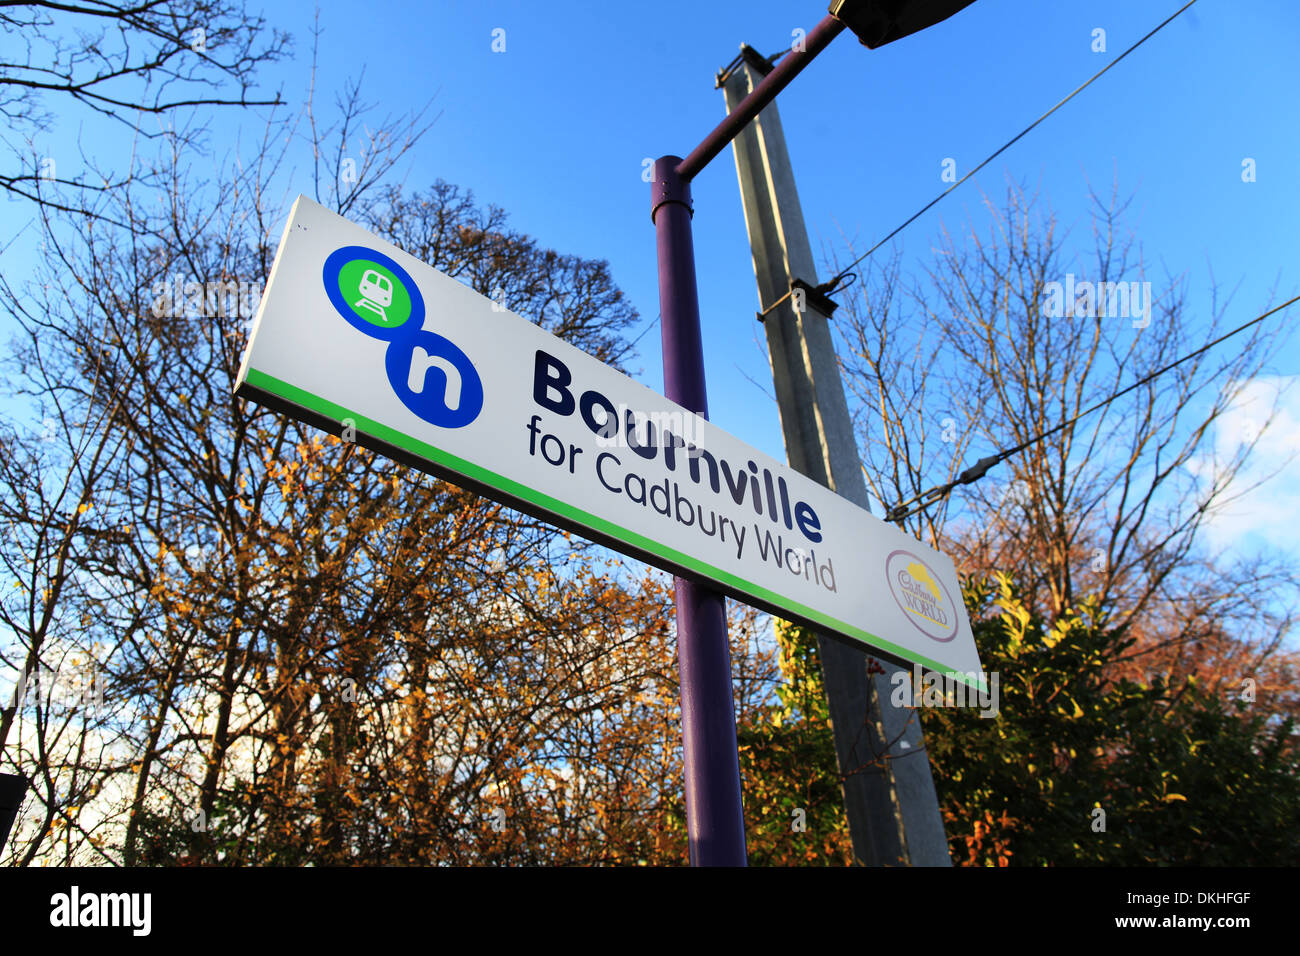 Bournville railway station sign - gateway to Cadbury World, the Cadbury factory owned by Kraft Stock Photo